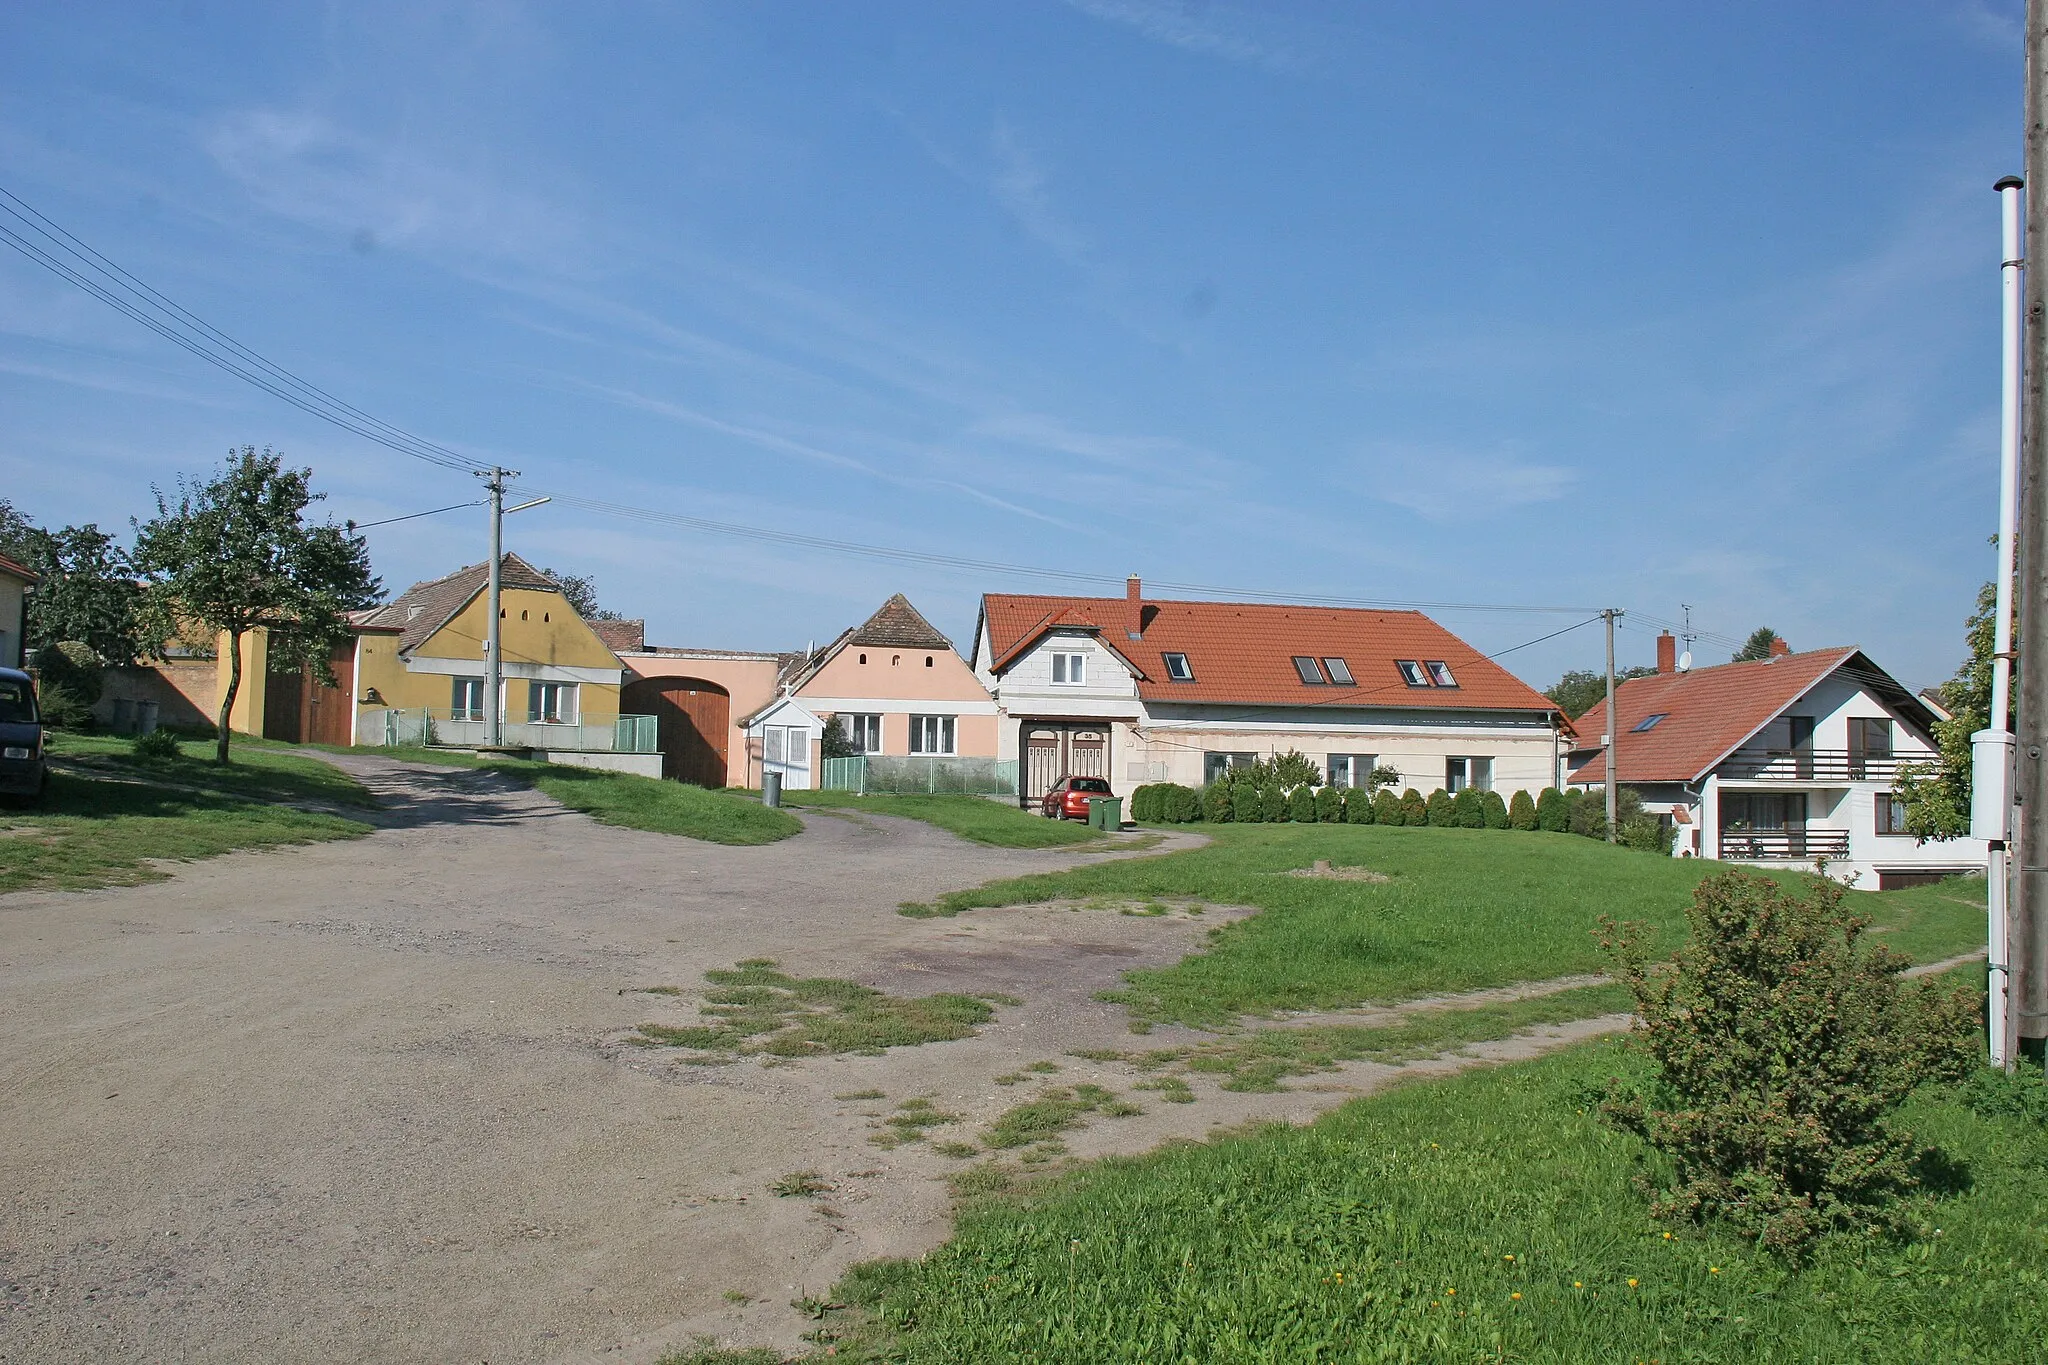 Photo showing: Mašovice čp. 35
Camera location 48° 51′ 26.32″ N, 15° 58′ 23.61″ E View this and other nearby images on: OpenStreetMap 48.857312;   15.973225

This file was created as a part of the photographic program of Wikimedia Czech Republic. Project: Foto českých obcí The program supports Wikimedia Commons photographers in the Czech Republic.